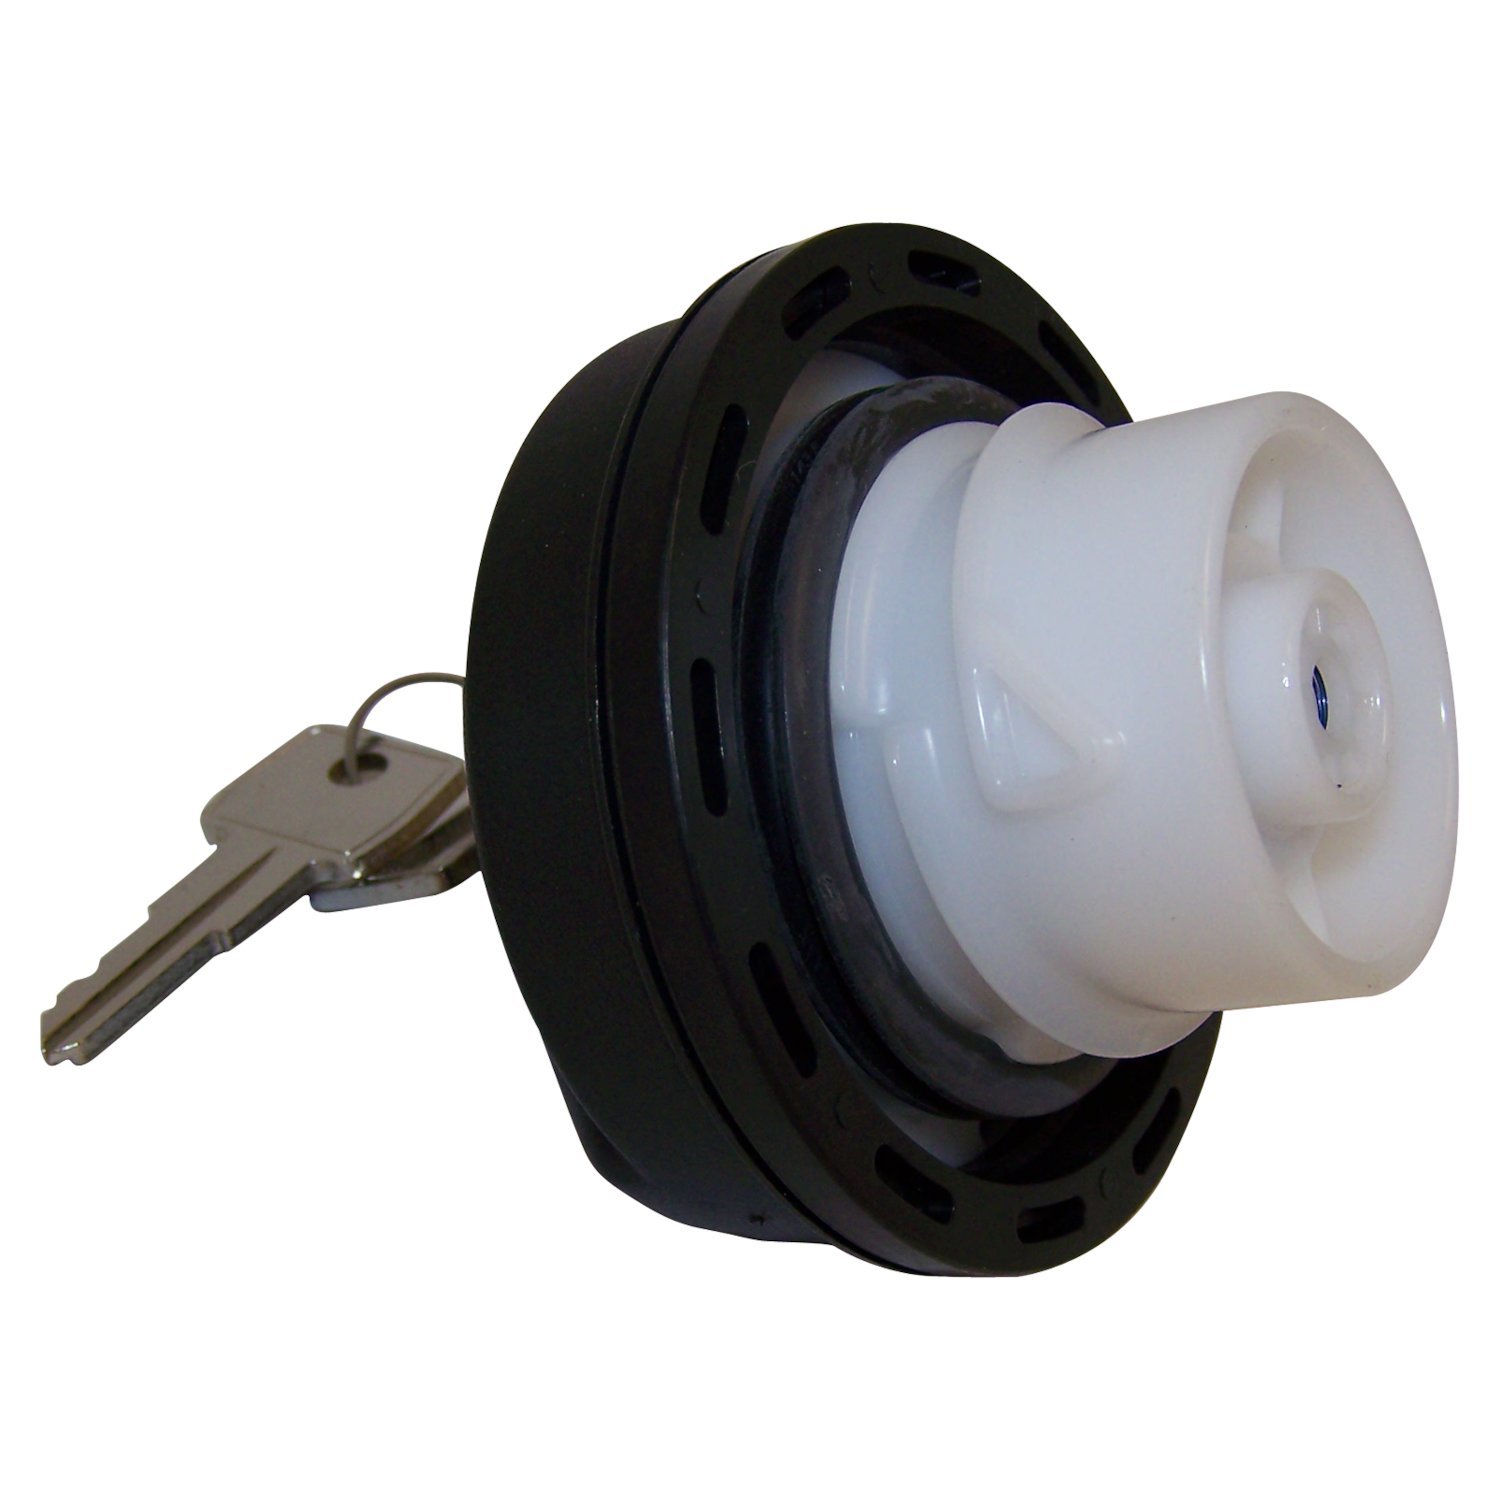 Fuel Cap; Incl. Coded Lock Cylinder And 2 Keys; Does Not Include Tether;